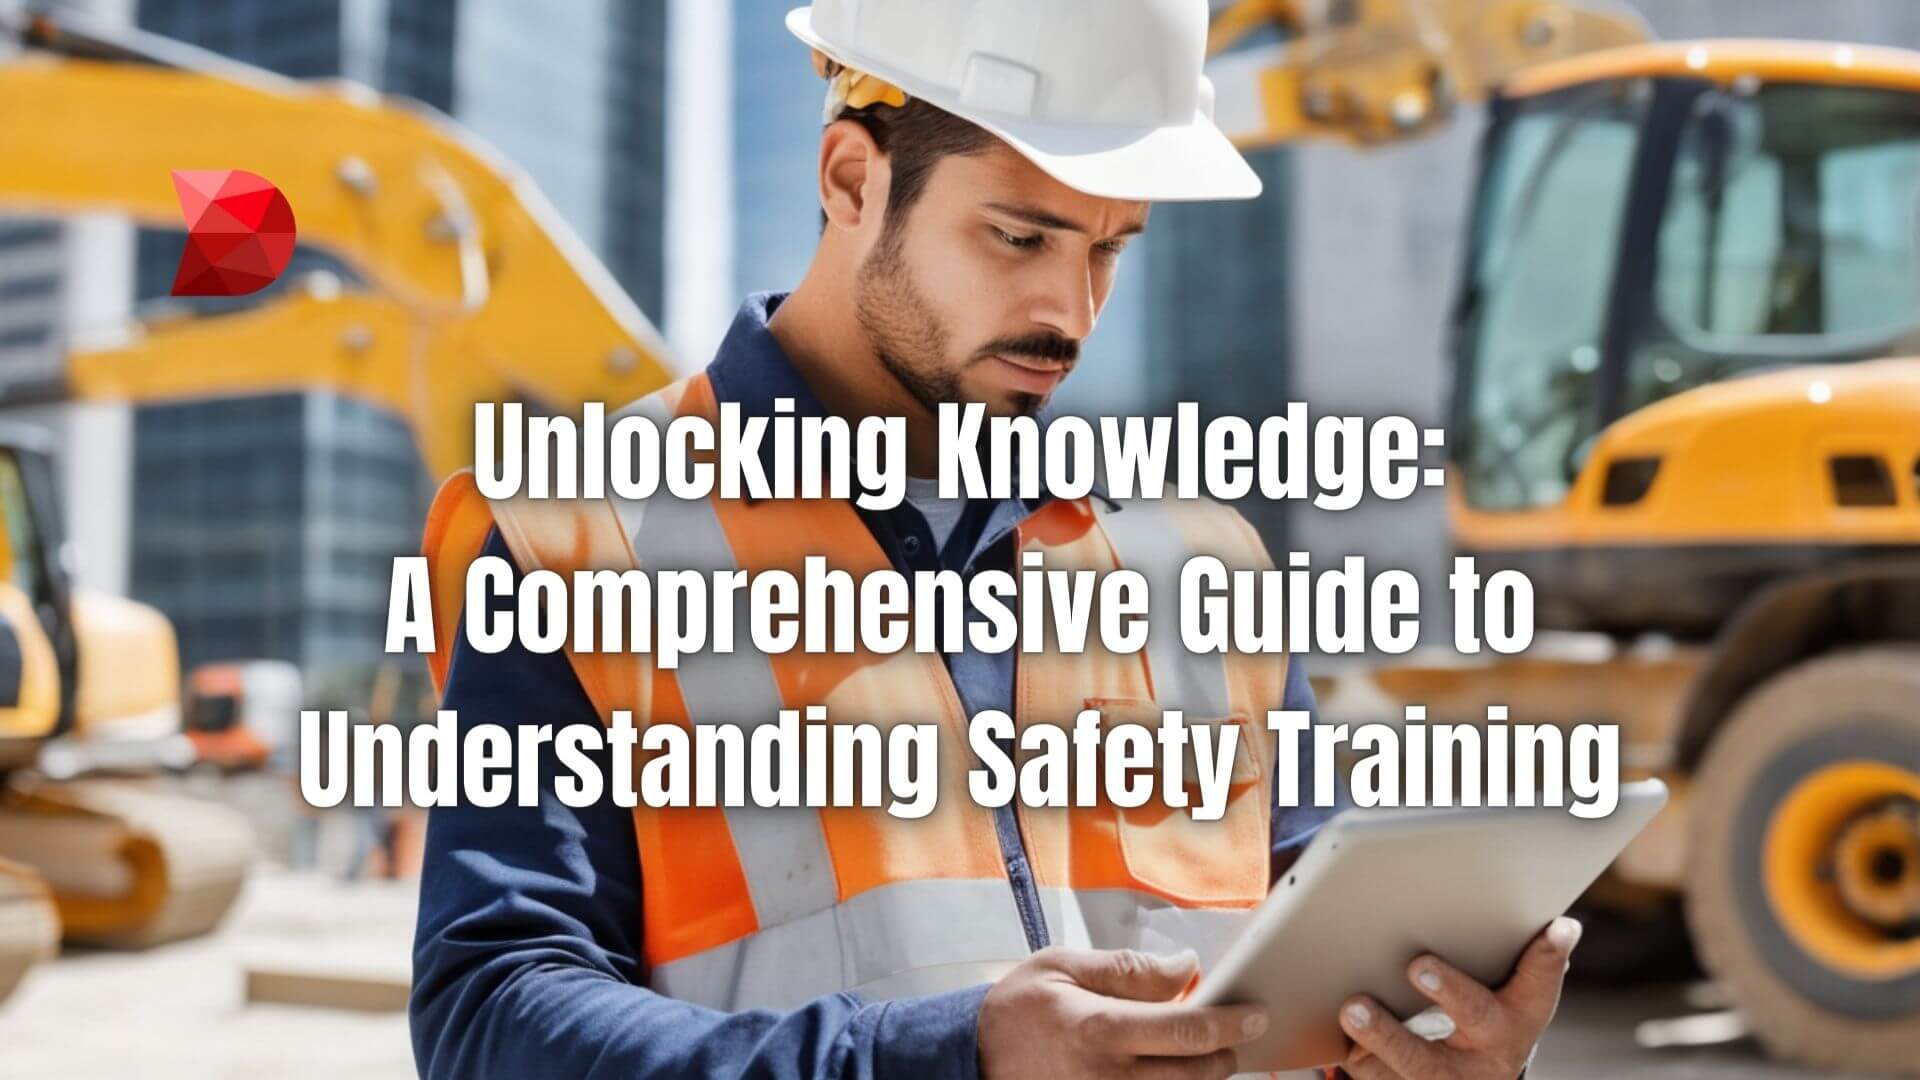 Discover comprehensive safety training insights in this guide. Equip yourself with essential knowledge for a safer workplace. Learn more!